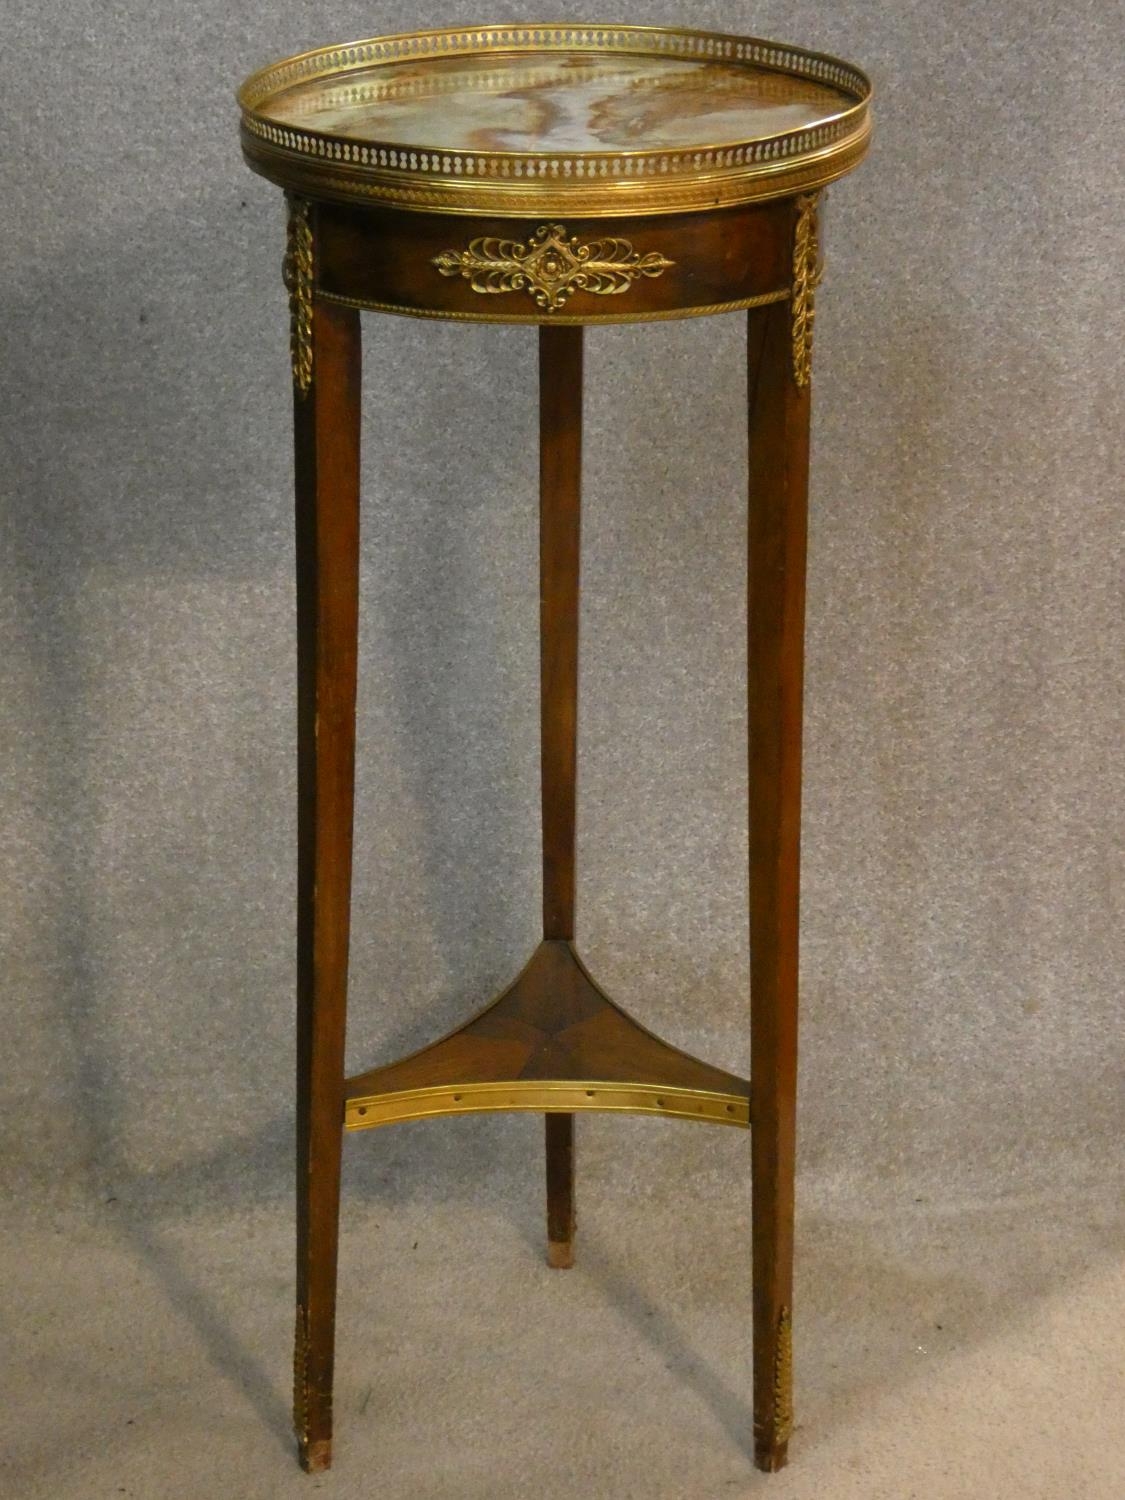 A 19th century French Empire ormolu mounted urn stand with brass galleried marble top on tapering